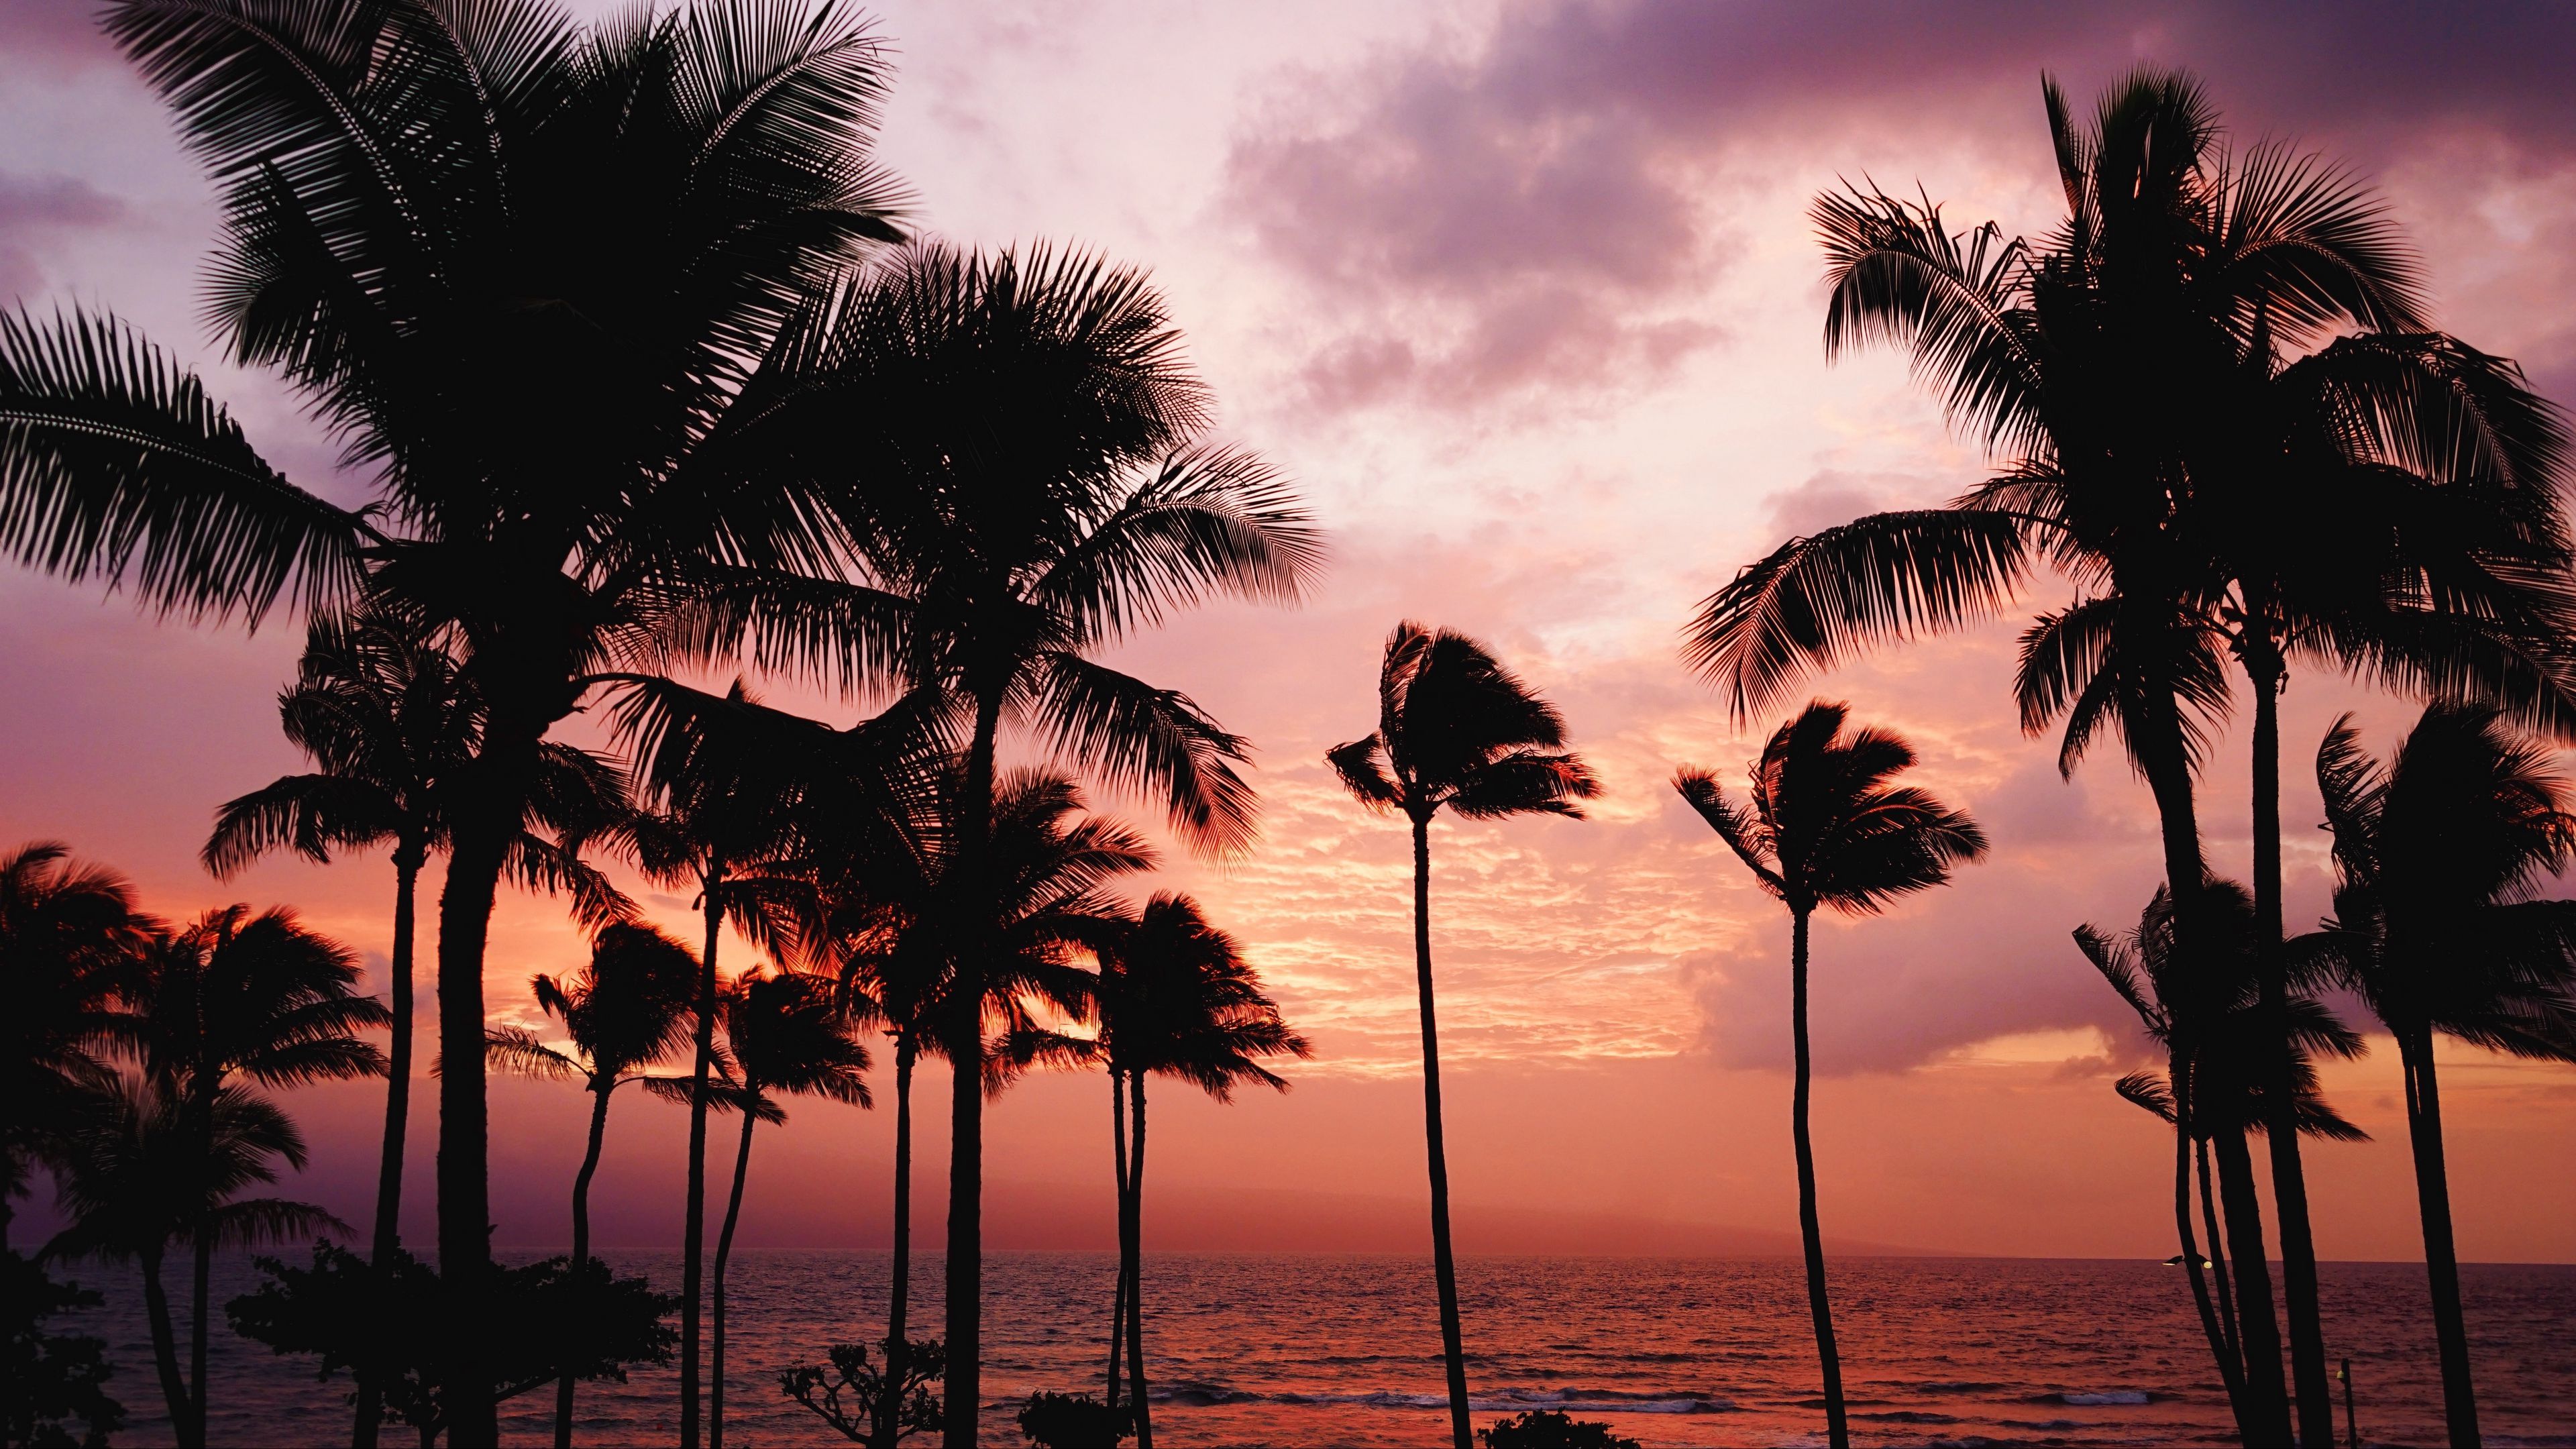 A sunset over the ocean with palm trees - Palm tree